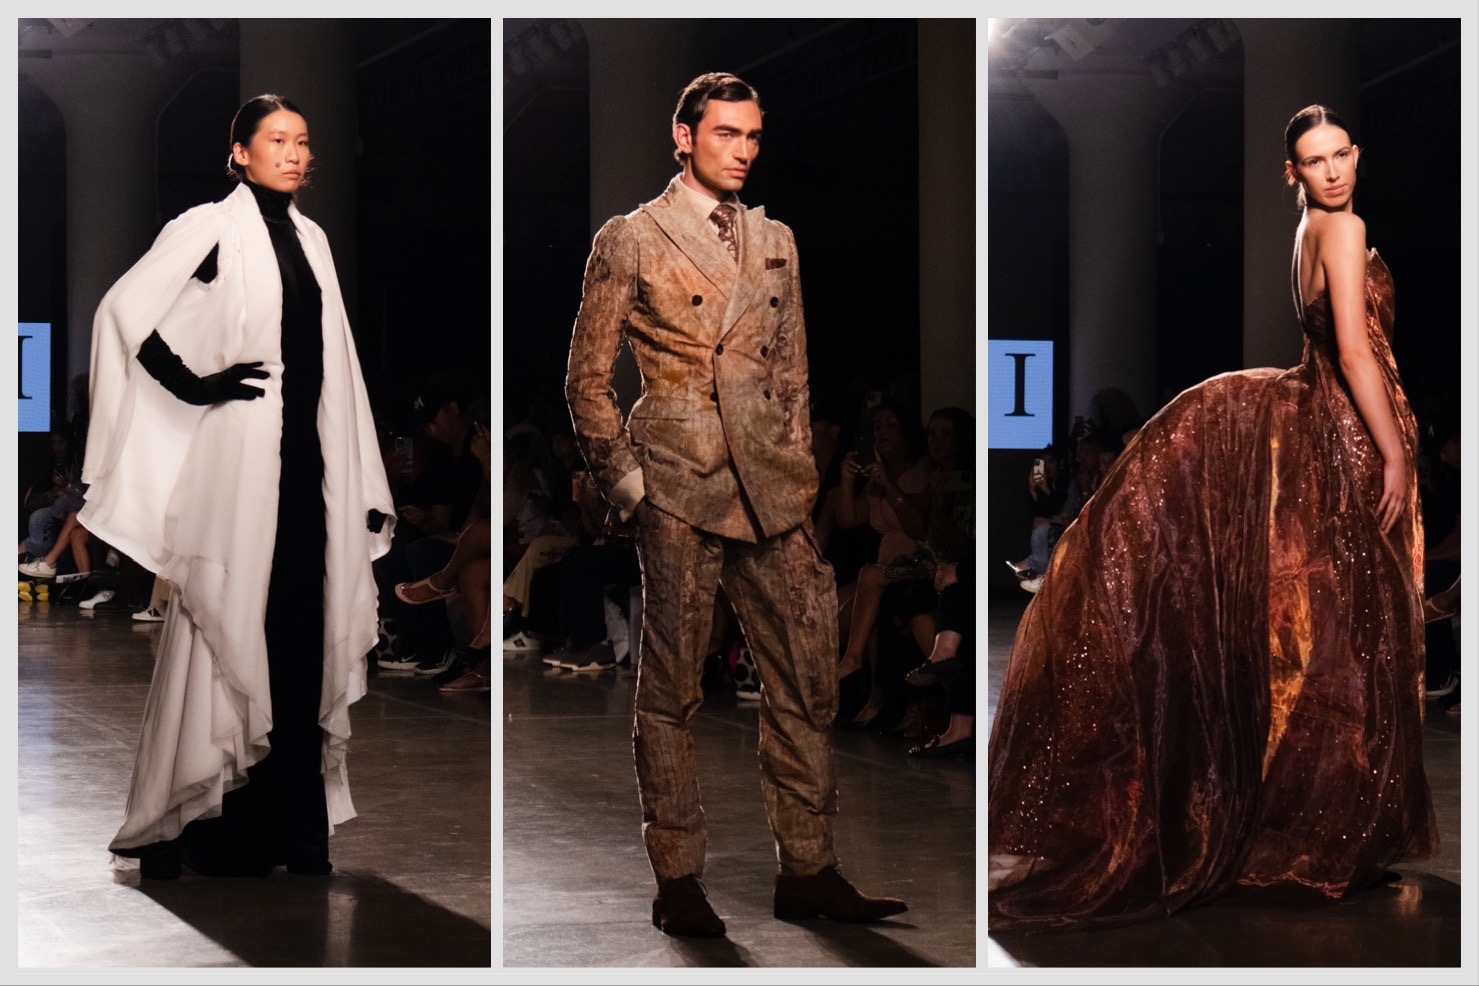 A collage of three images from left to right: A modelwearing black-and-white dress and cloak; a model wearing a brown double-breasted suit; a model wearing a brown bustled silk dress.